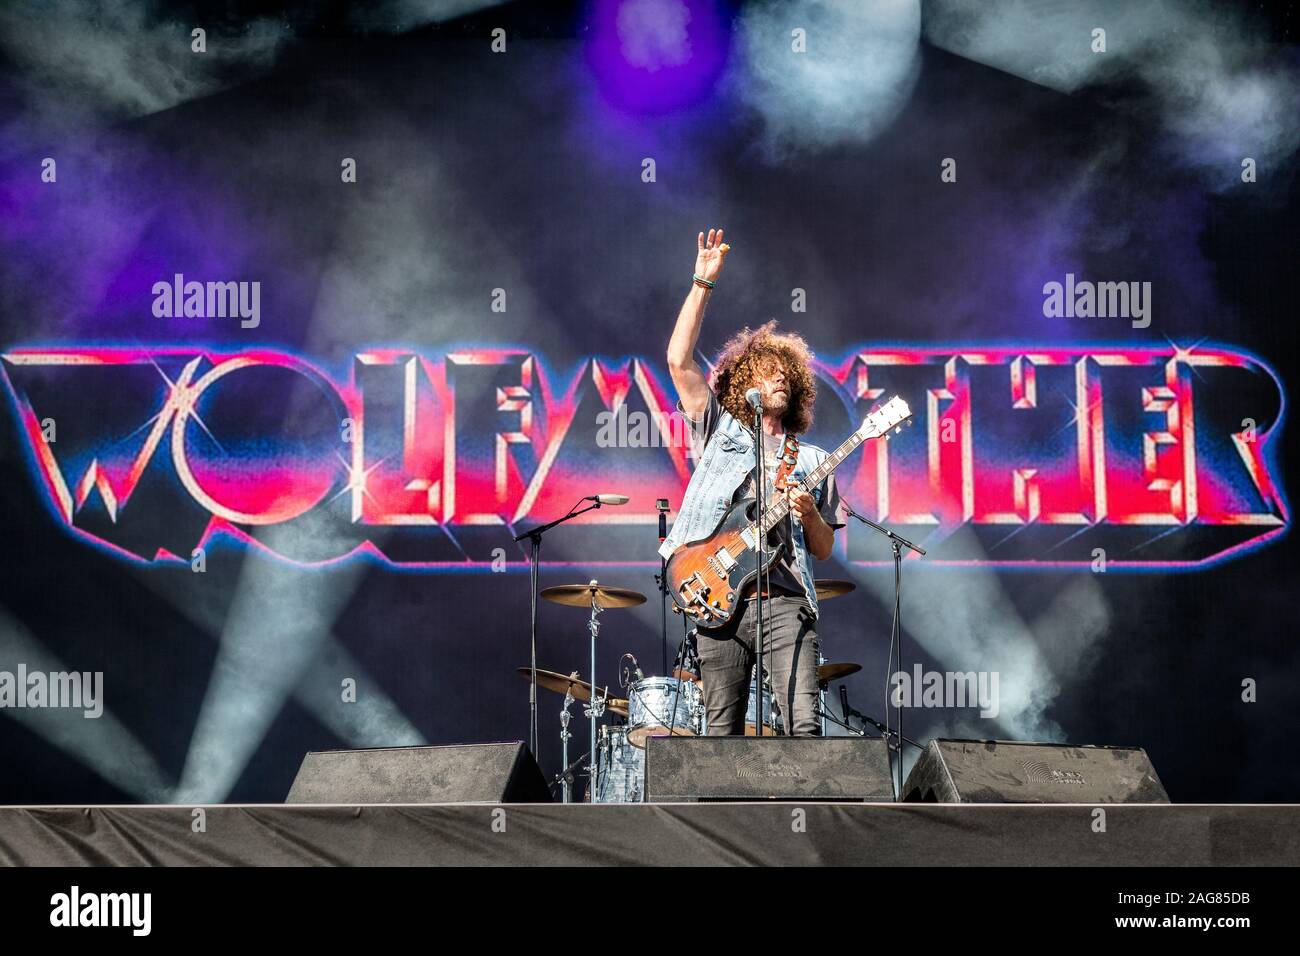 Oslo, Norway. 28th, June 2019. The Australian rock band Wolfmother performs a live concert during the Norwegian music festival Tons of Rock 2019. Here guitarist and singer Andrew Stockdale is seen live on stage. (Photo credit: Gonzales Photo - Terje Dokken). Stock Photo